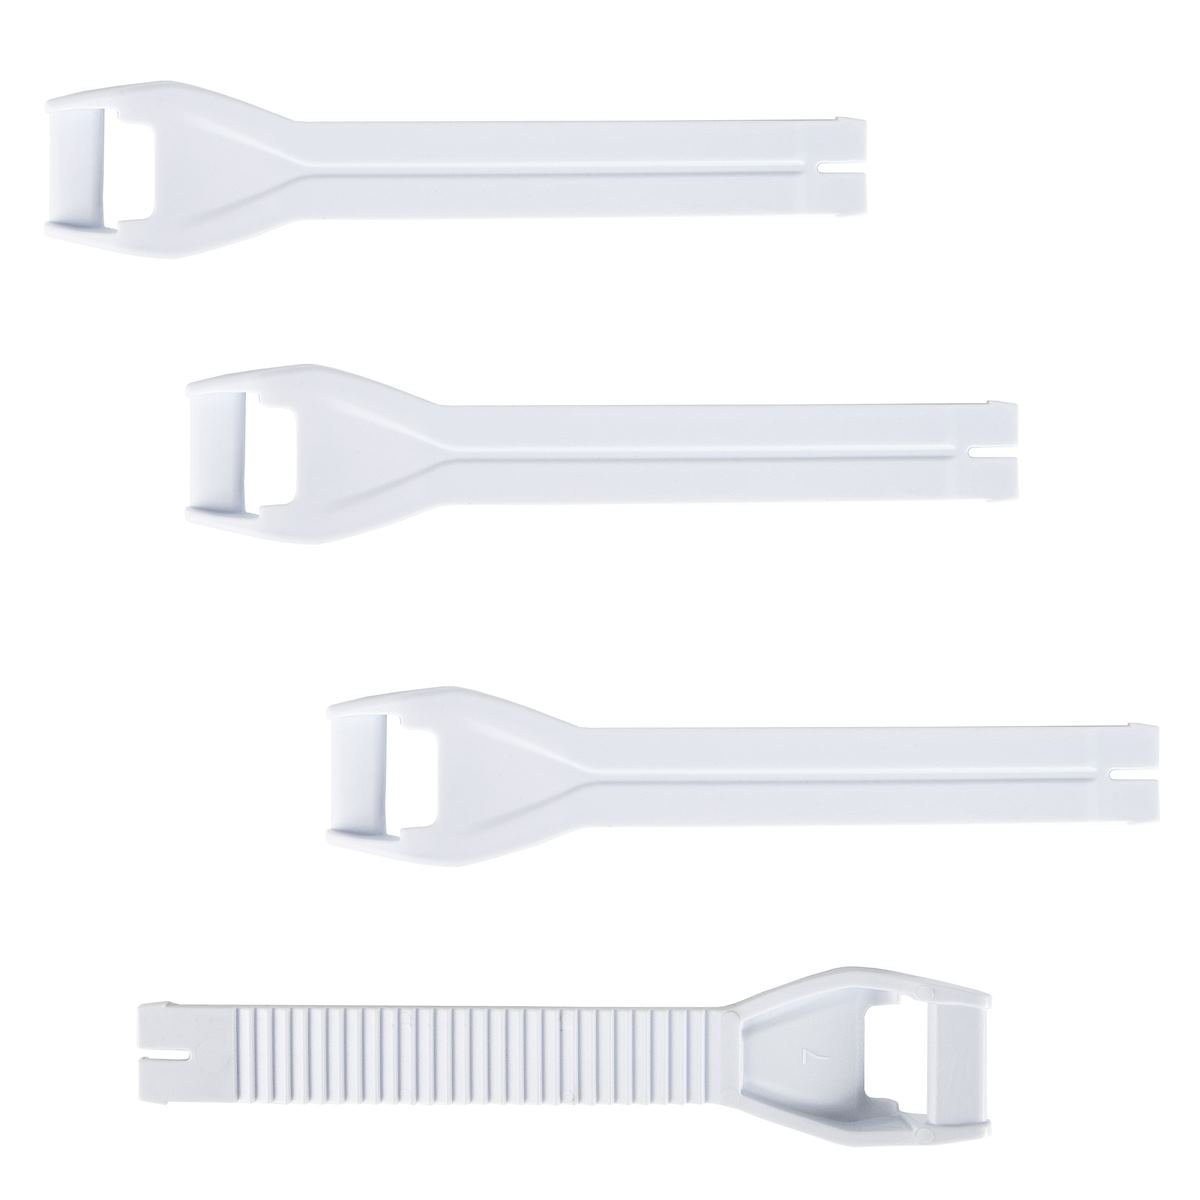 Gaerne Replacement Strap Kit SG 22 Set of 4 - Long, White